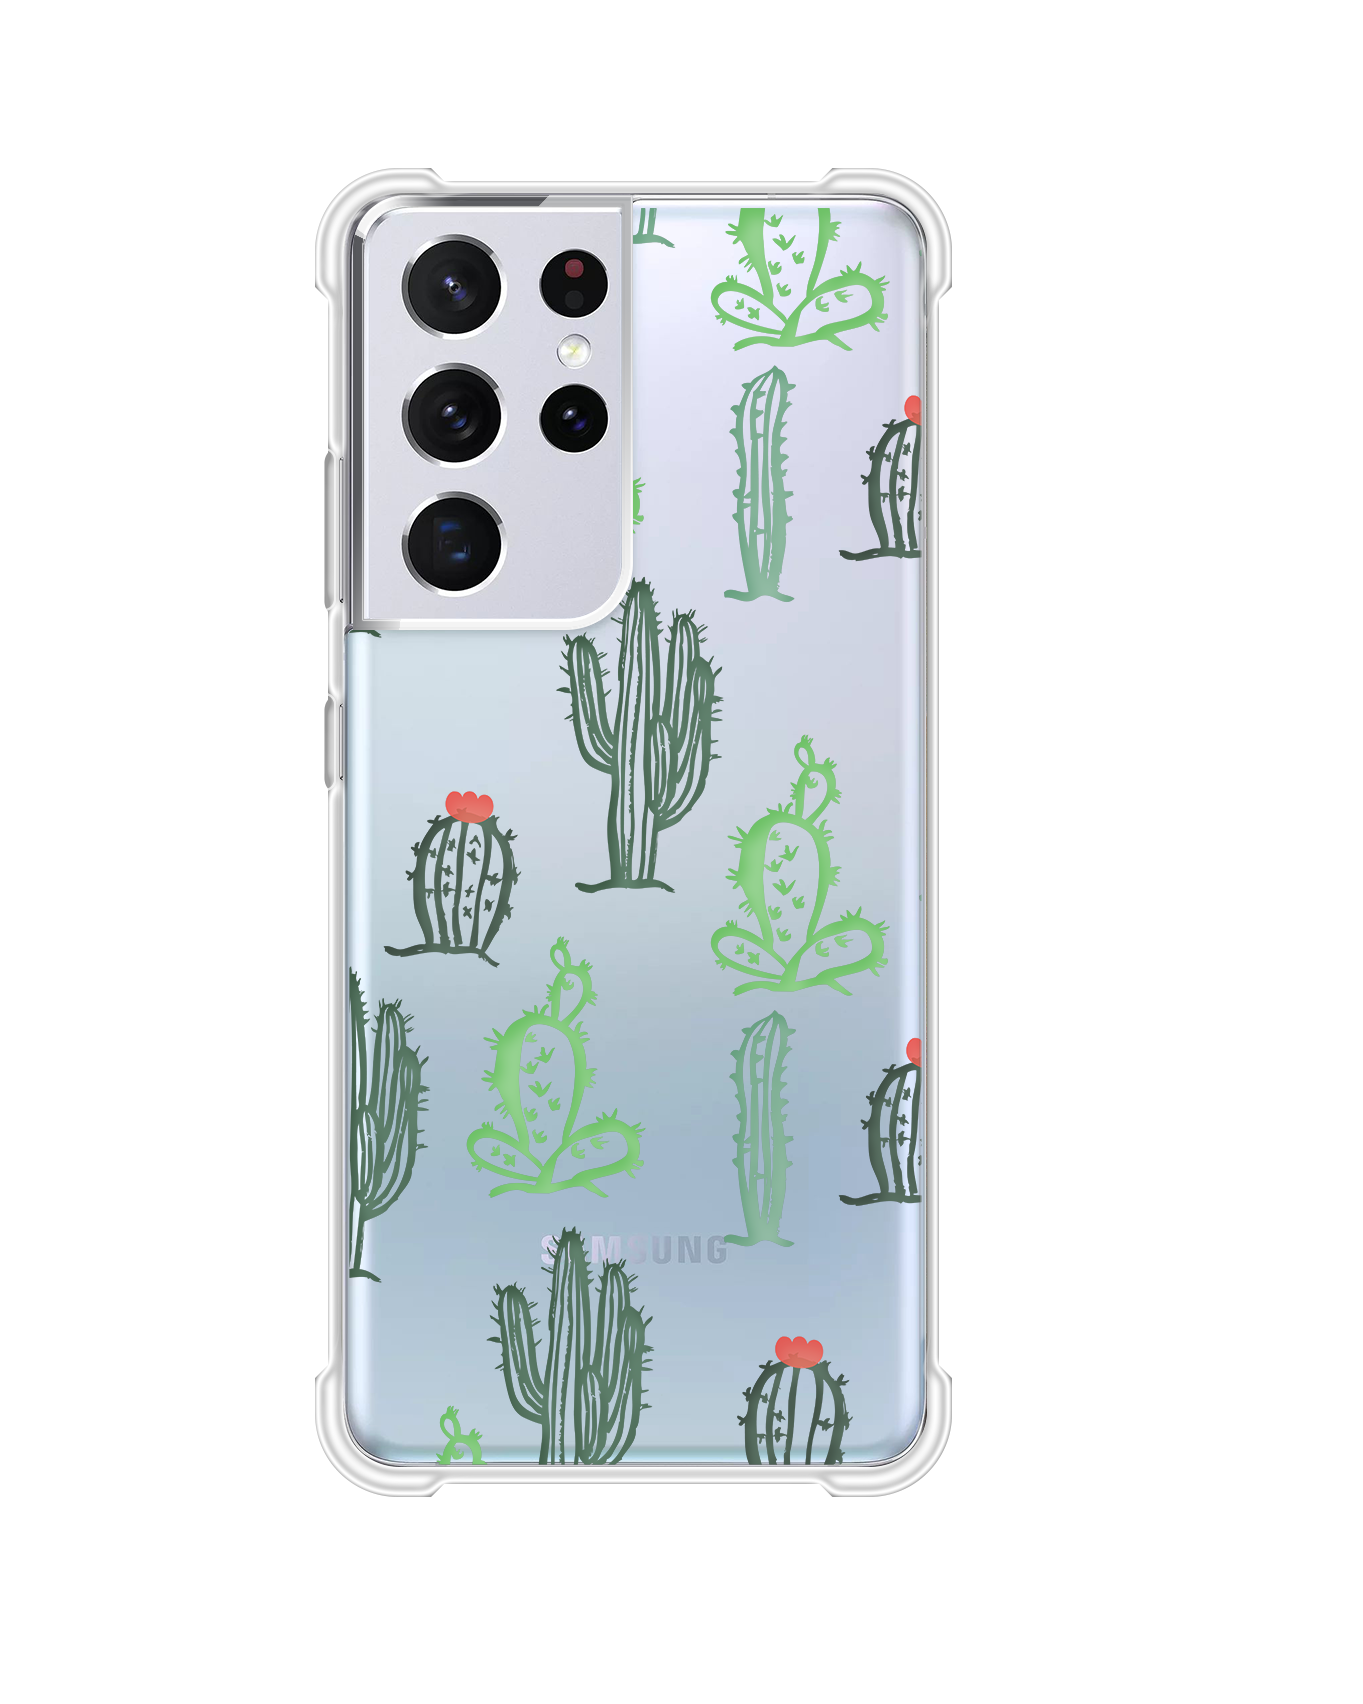 Android - Cactus